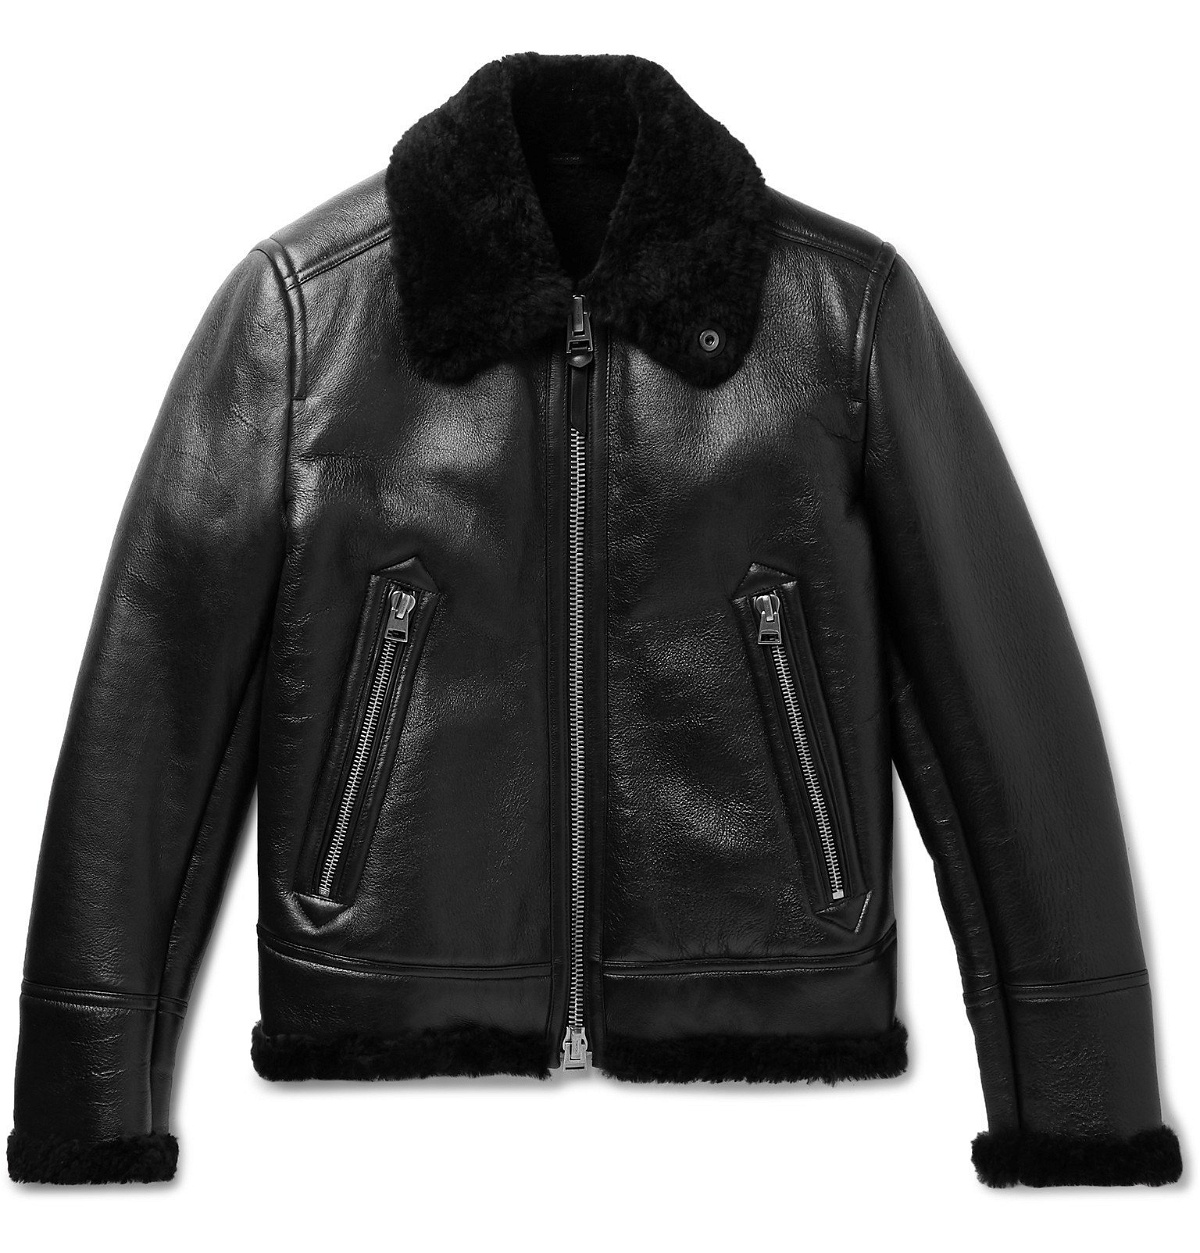 TOM FORD - Shearling-Lined Leather Aviator Jacket - Black TOM FORD